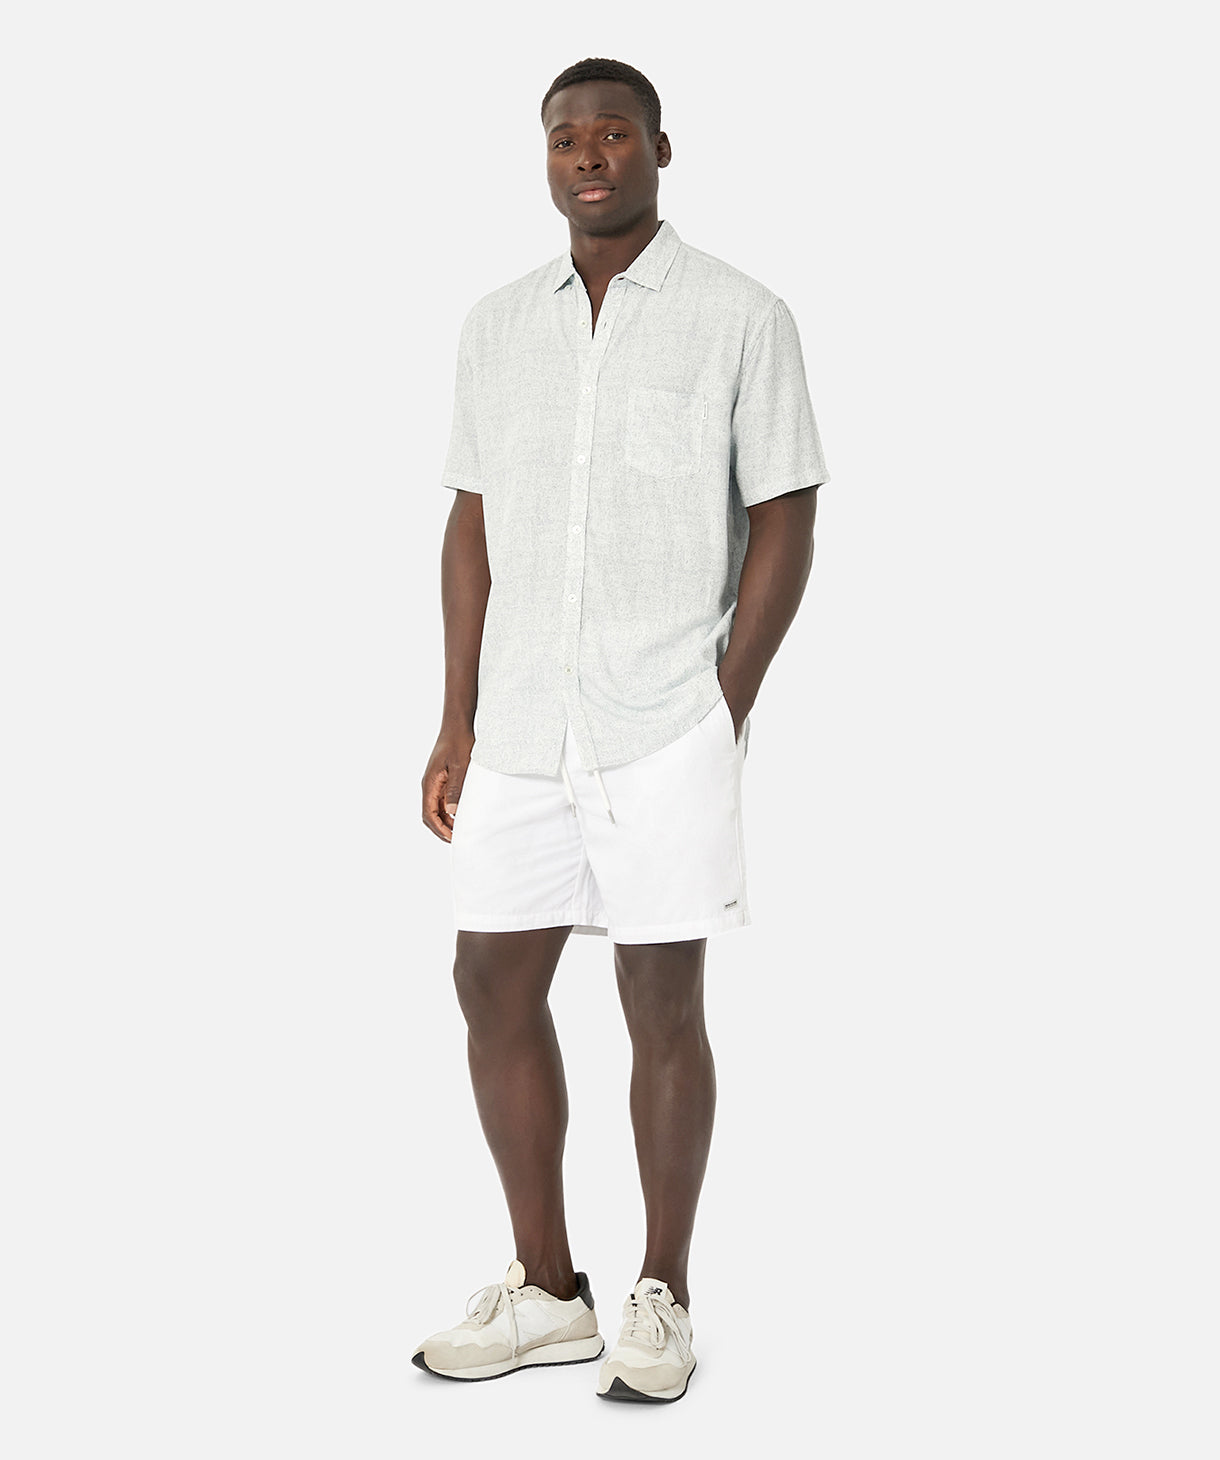 Shop The Ipanema S/s Shirt in White/Sage | Industrie Clothing ...